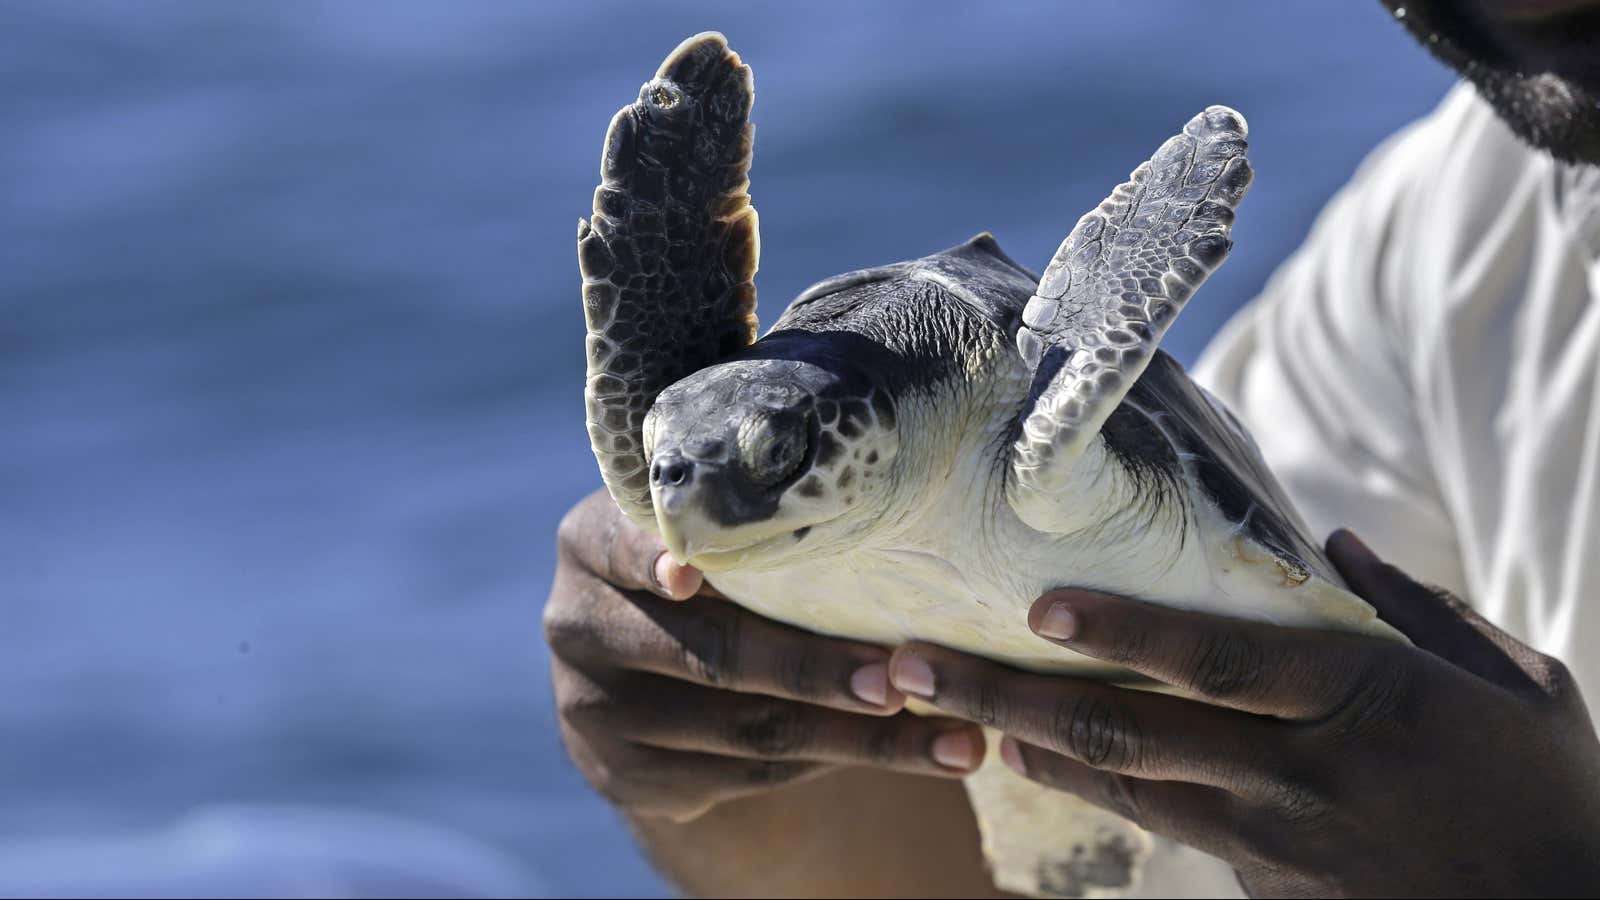 Kemp’s ridley sea turtles were already endangered, and climate change isn’t helping.